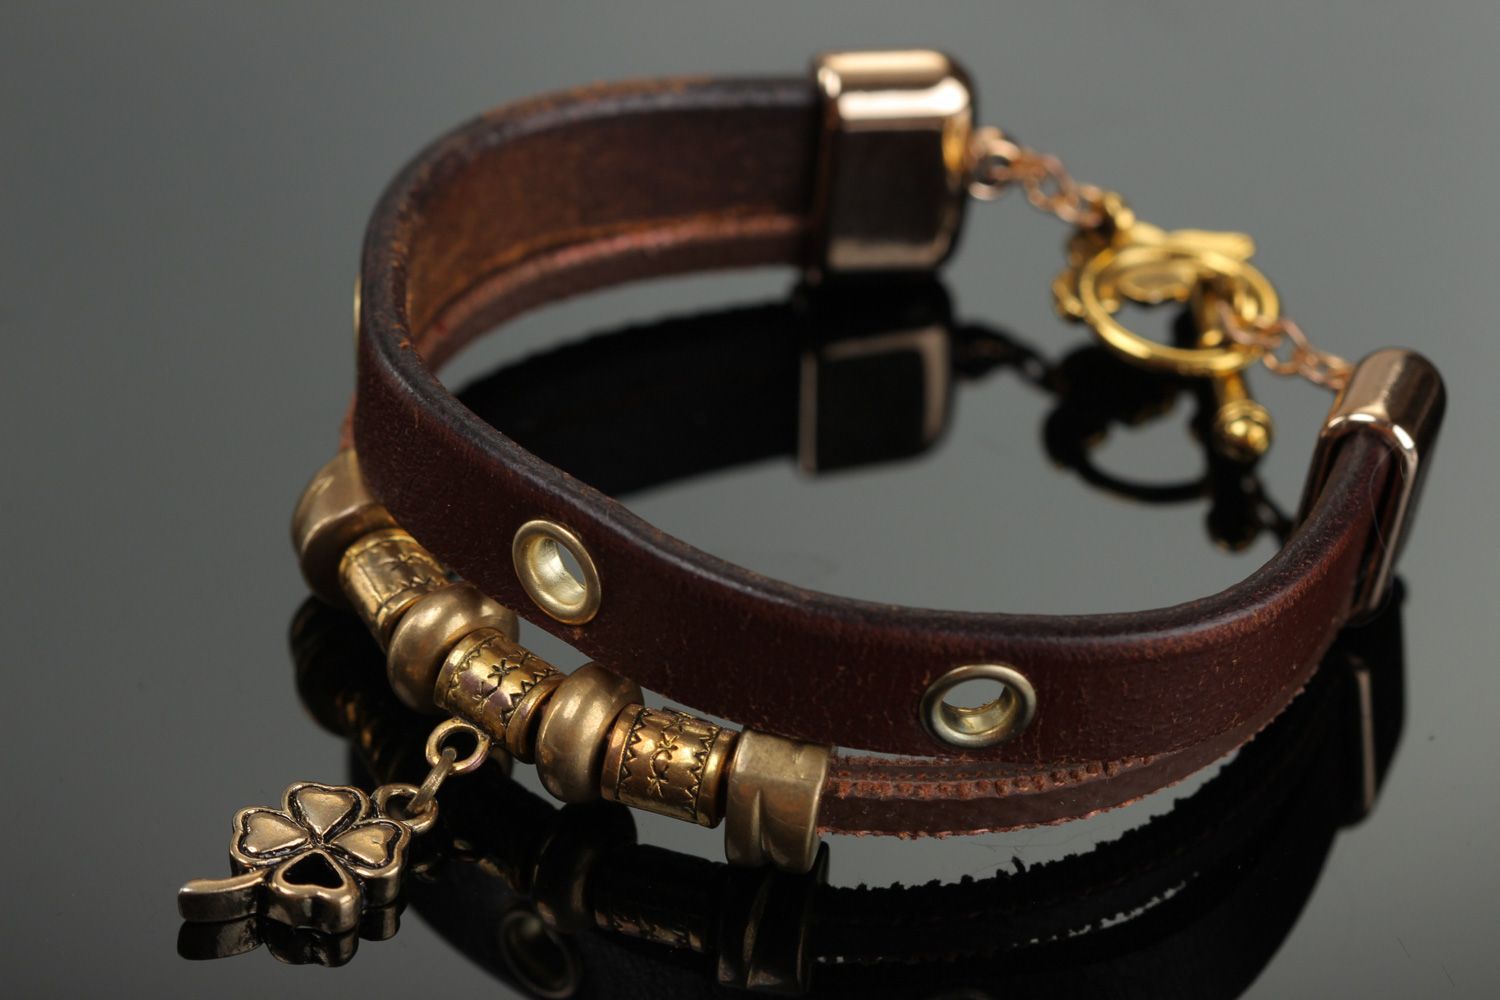 Handmade women's genuine leather bracelet with metal charm in the shape of clover photo 1